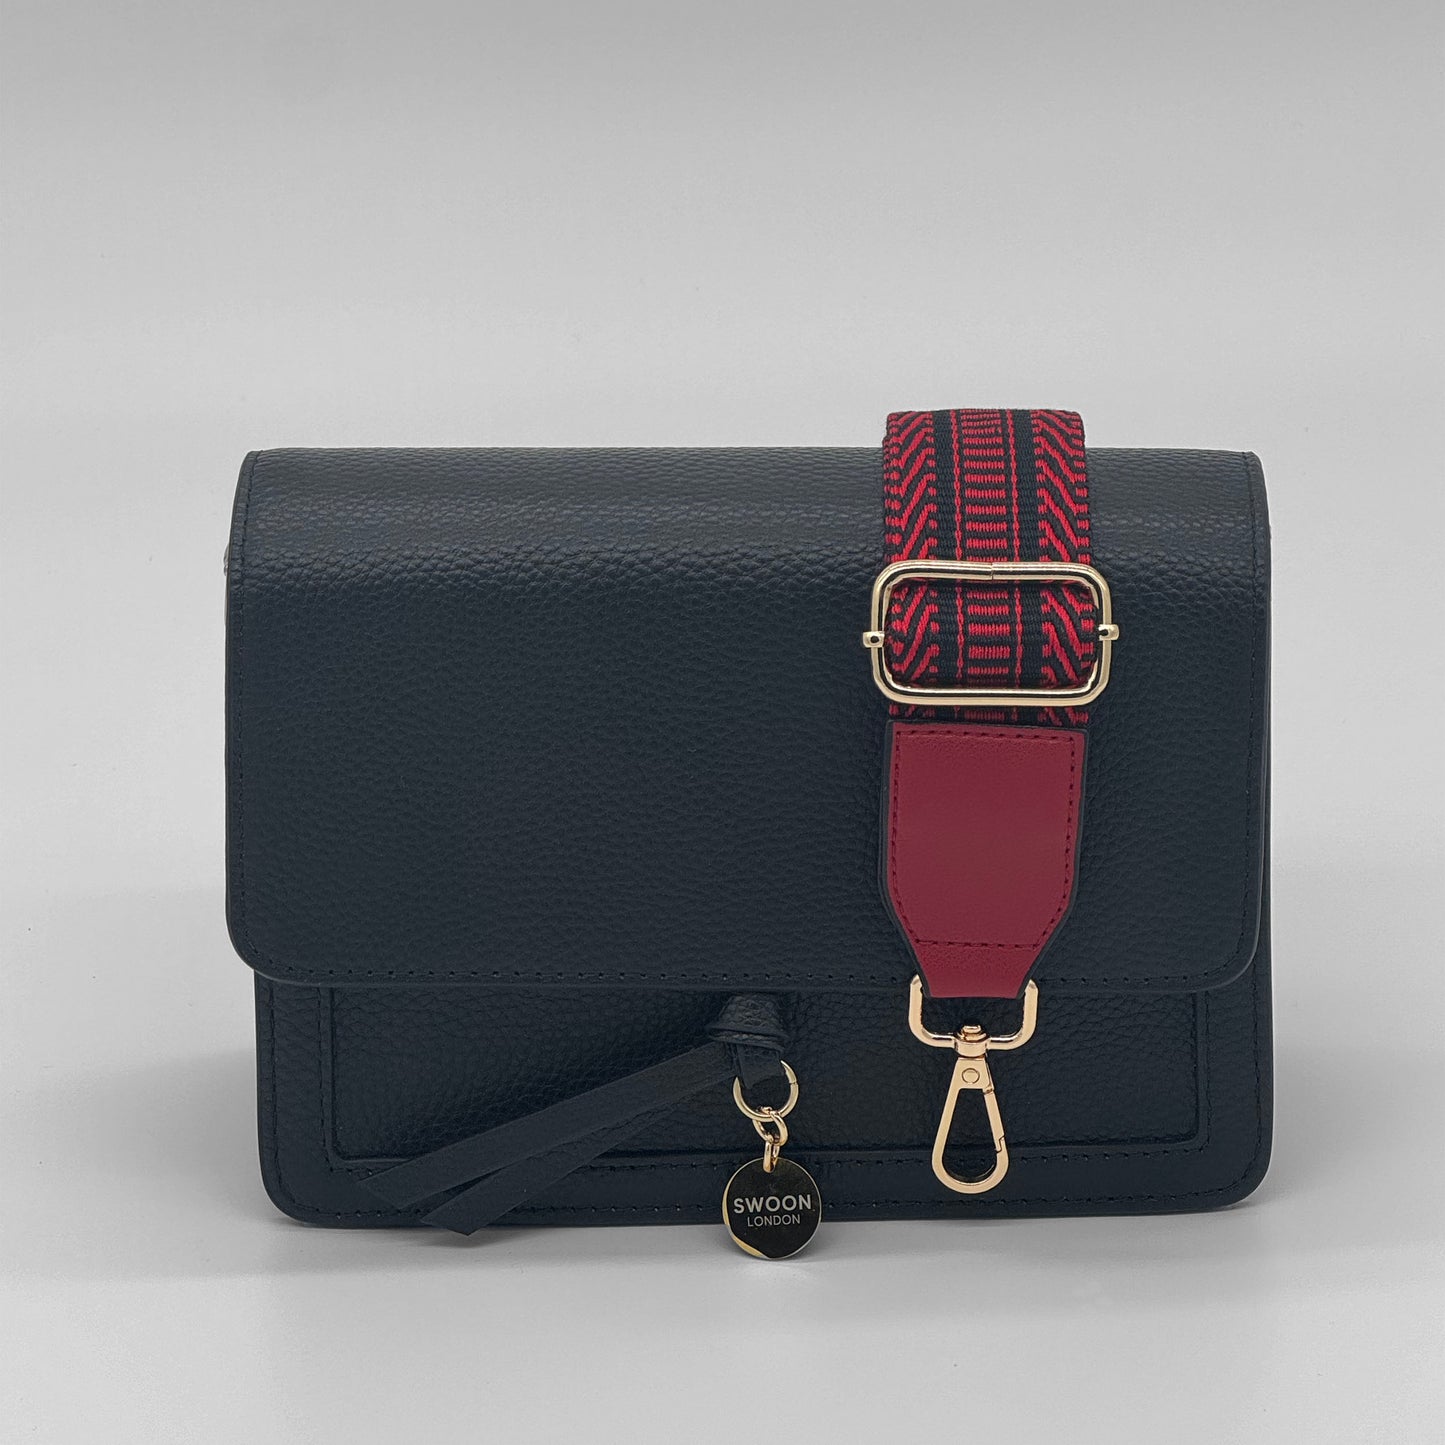 Red Patterned Leather Tipped Bag Strap